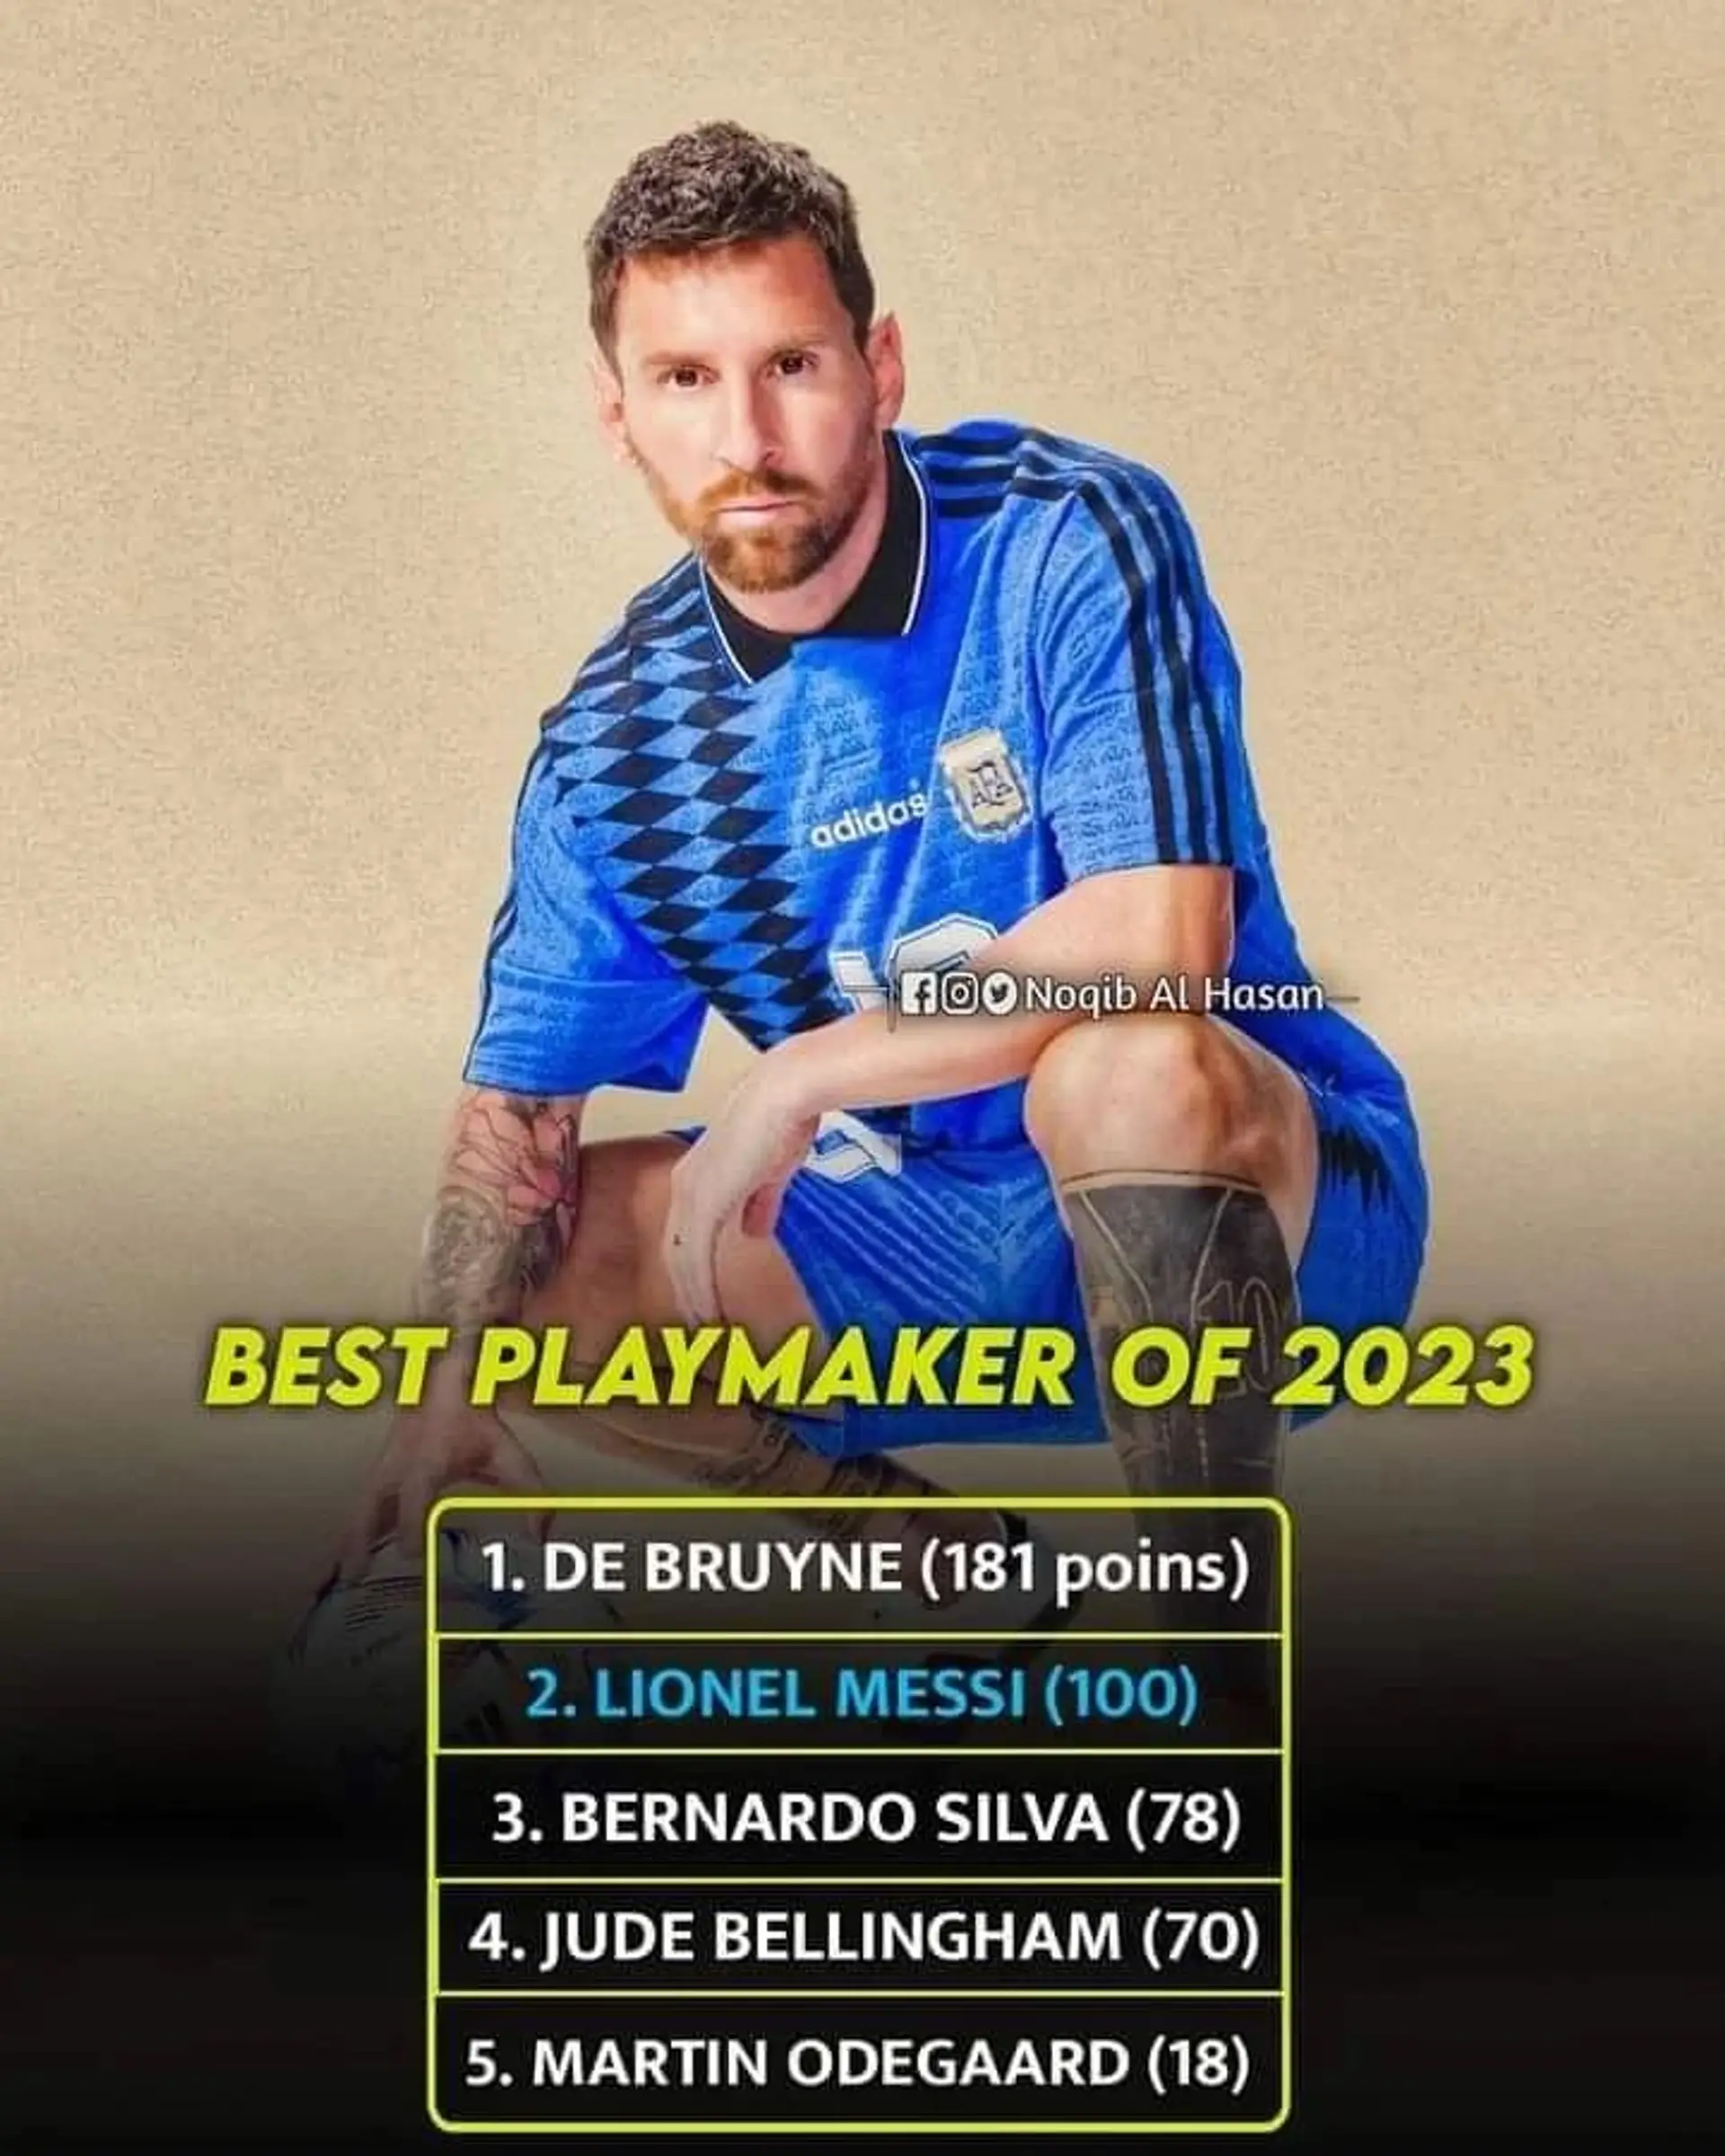 Messi still up there.